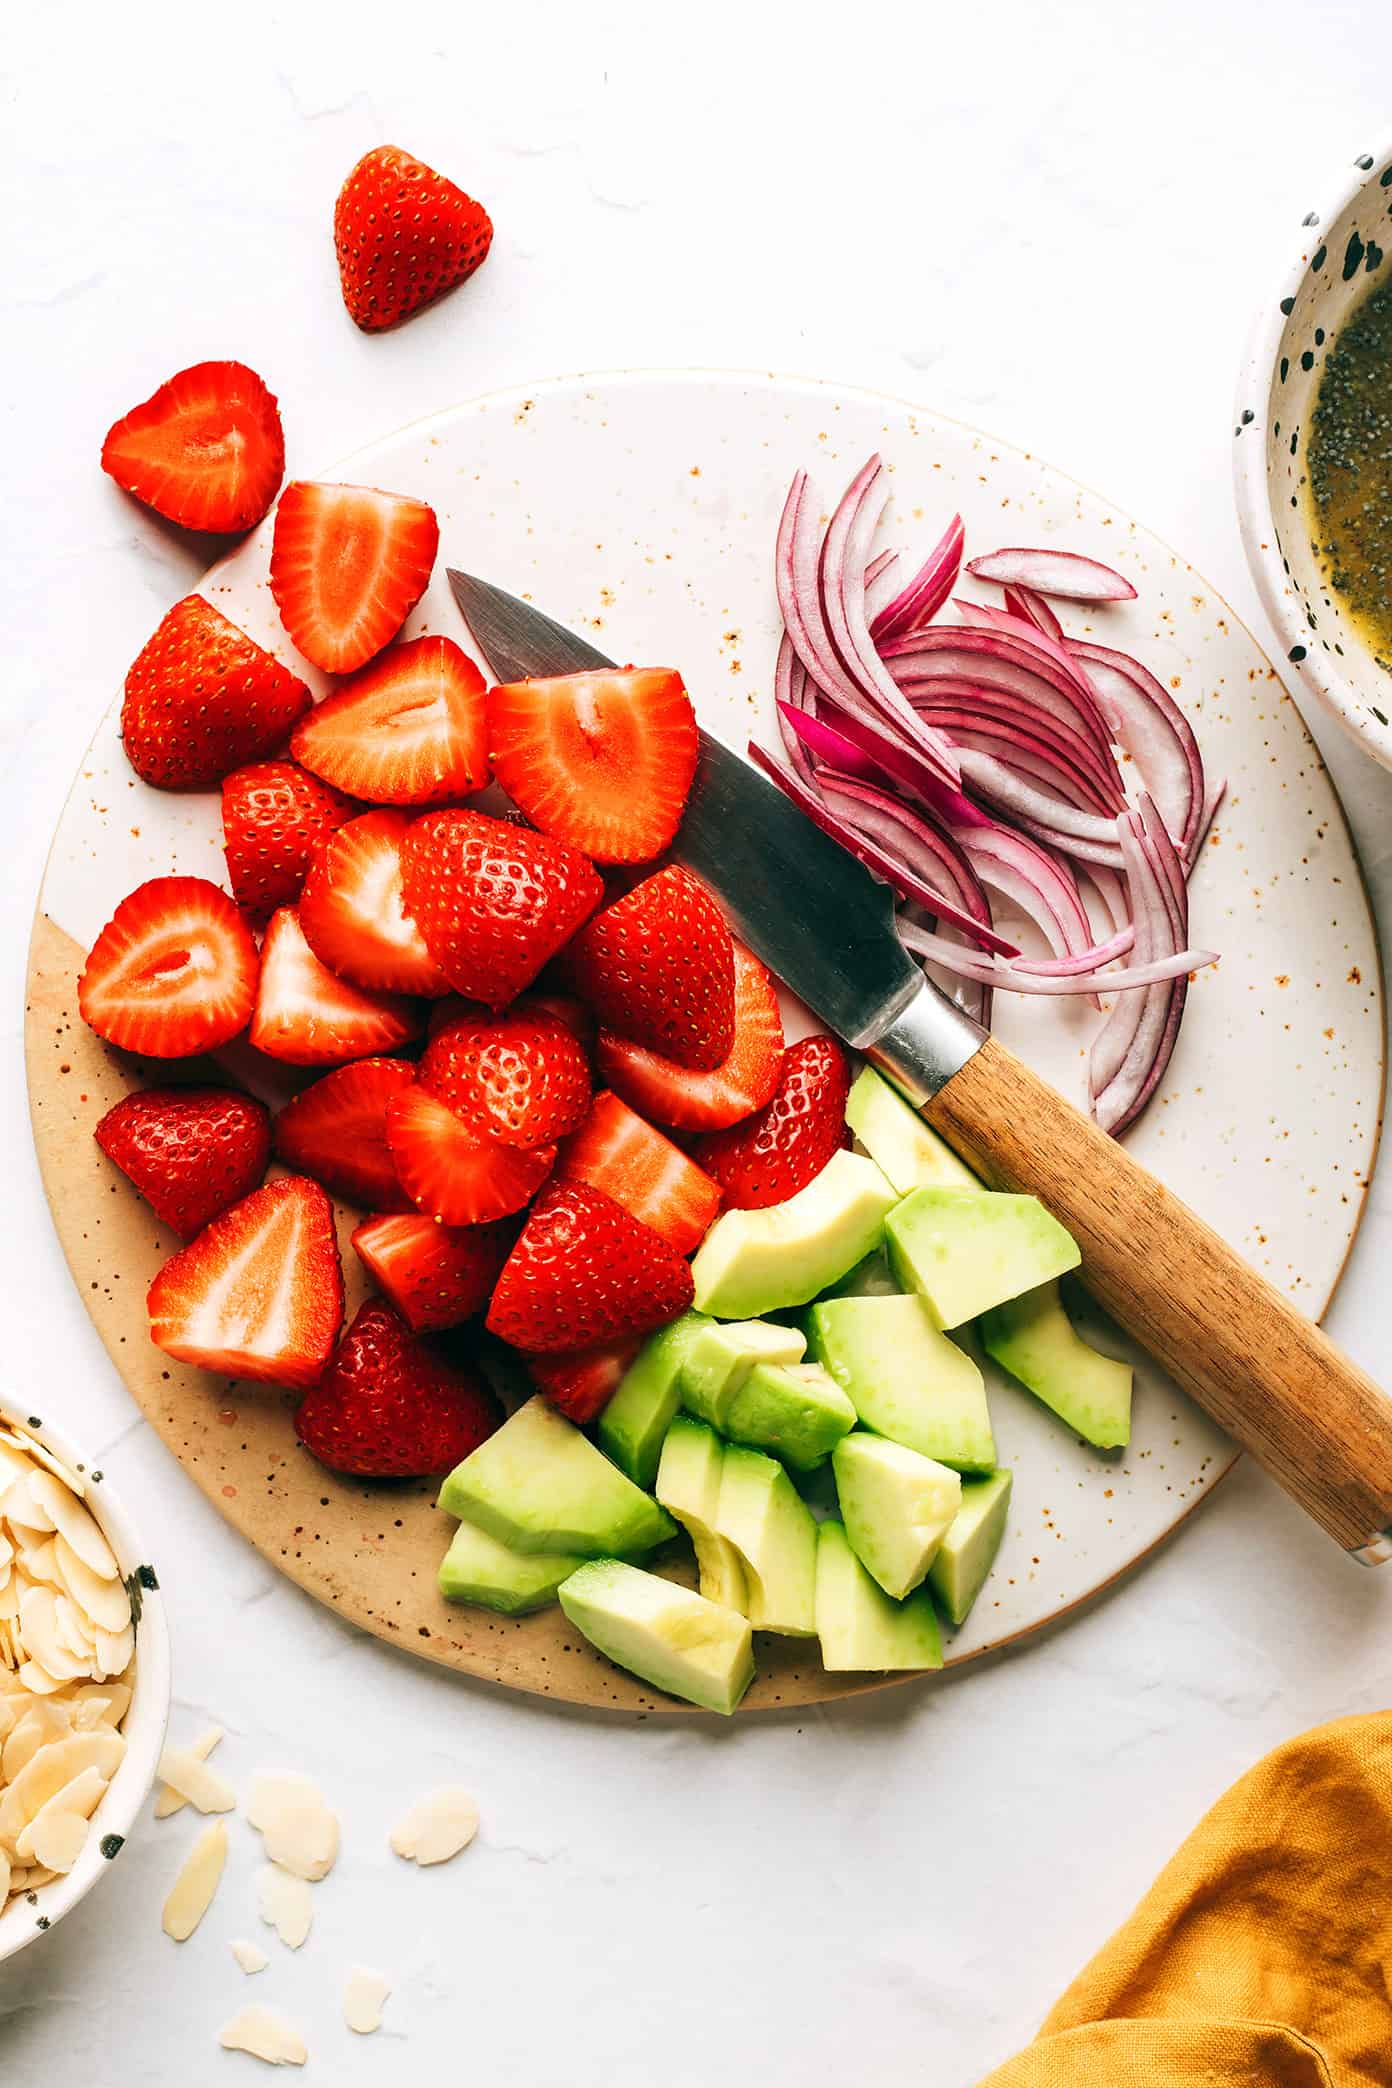 Slicing strawberries, avocado and red onion